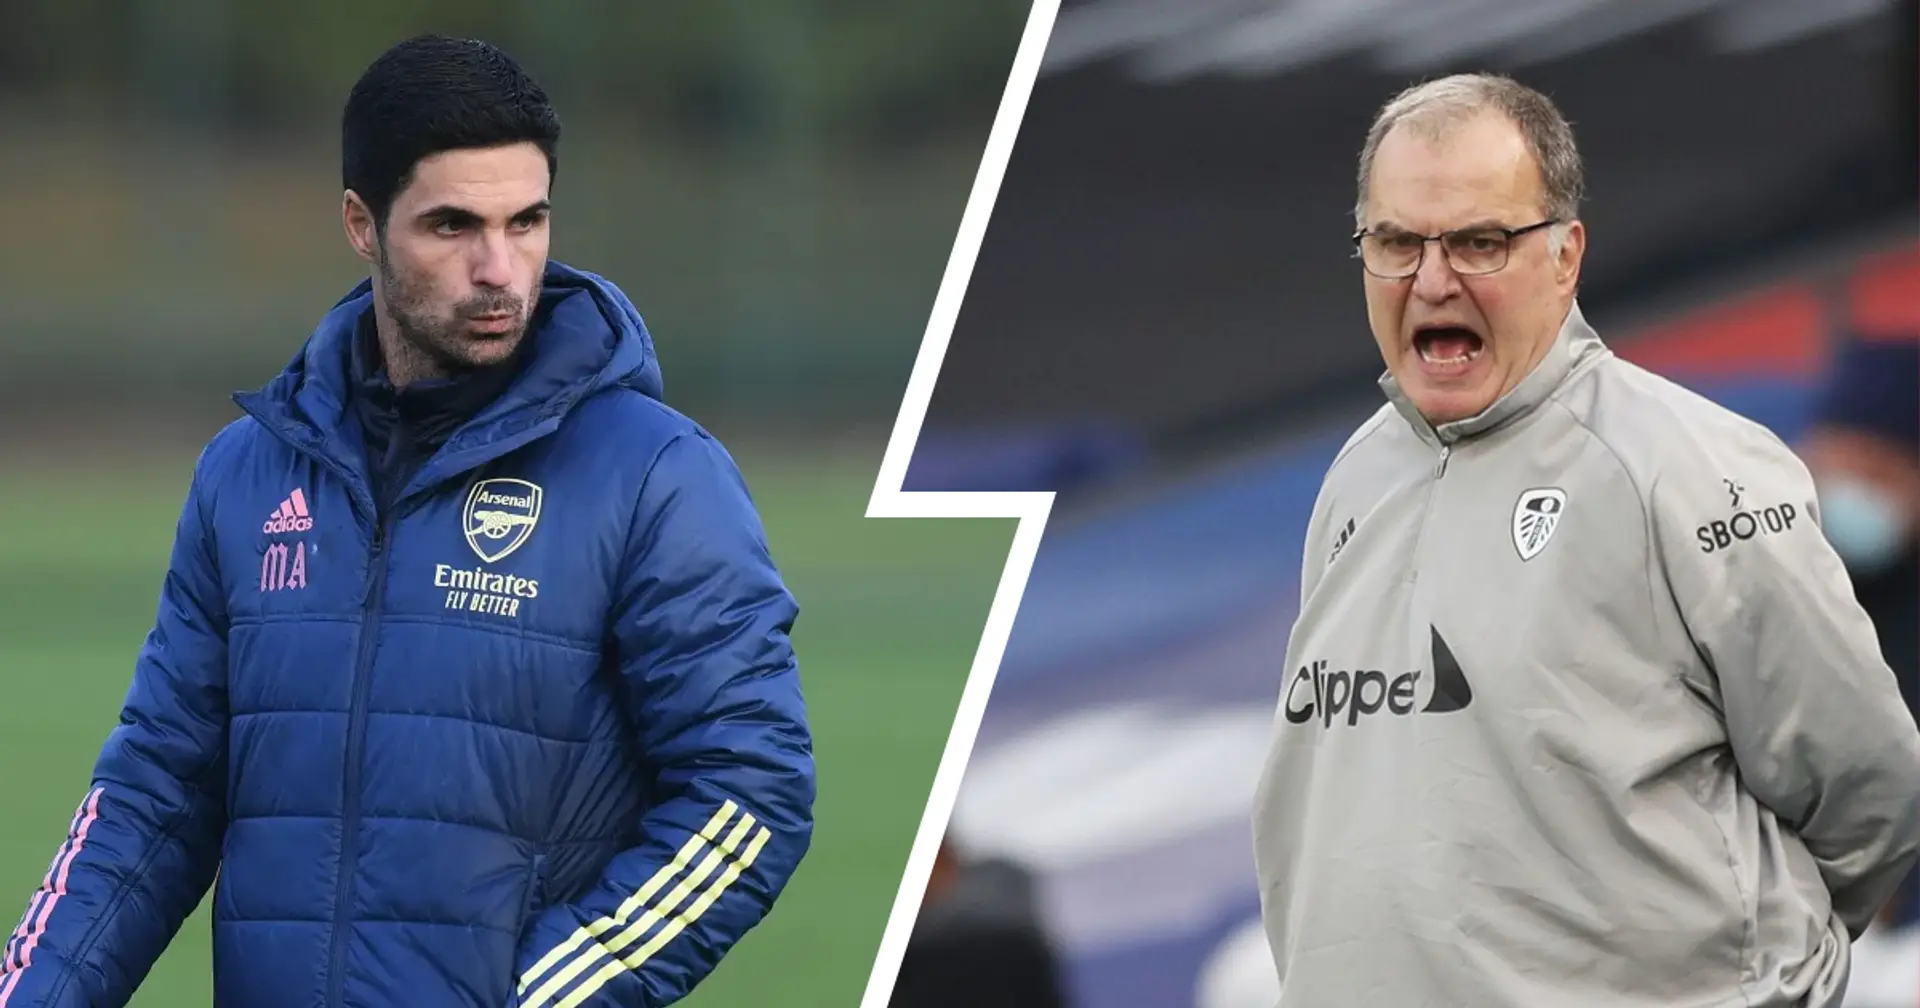 Leeds vs Arsenal preview: team news, predicted Gunners lineup, managers' quotes & more